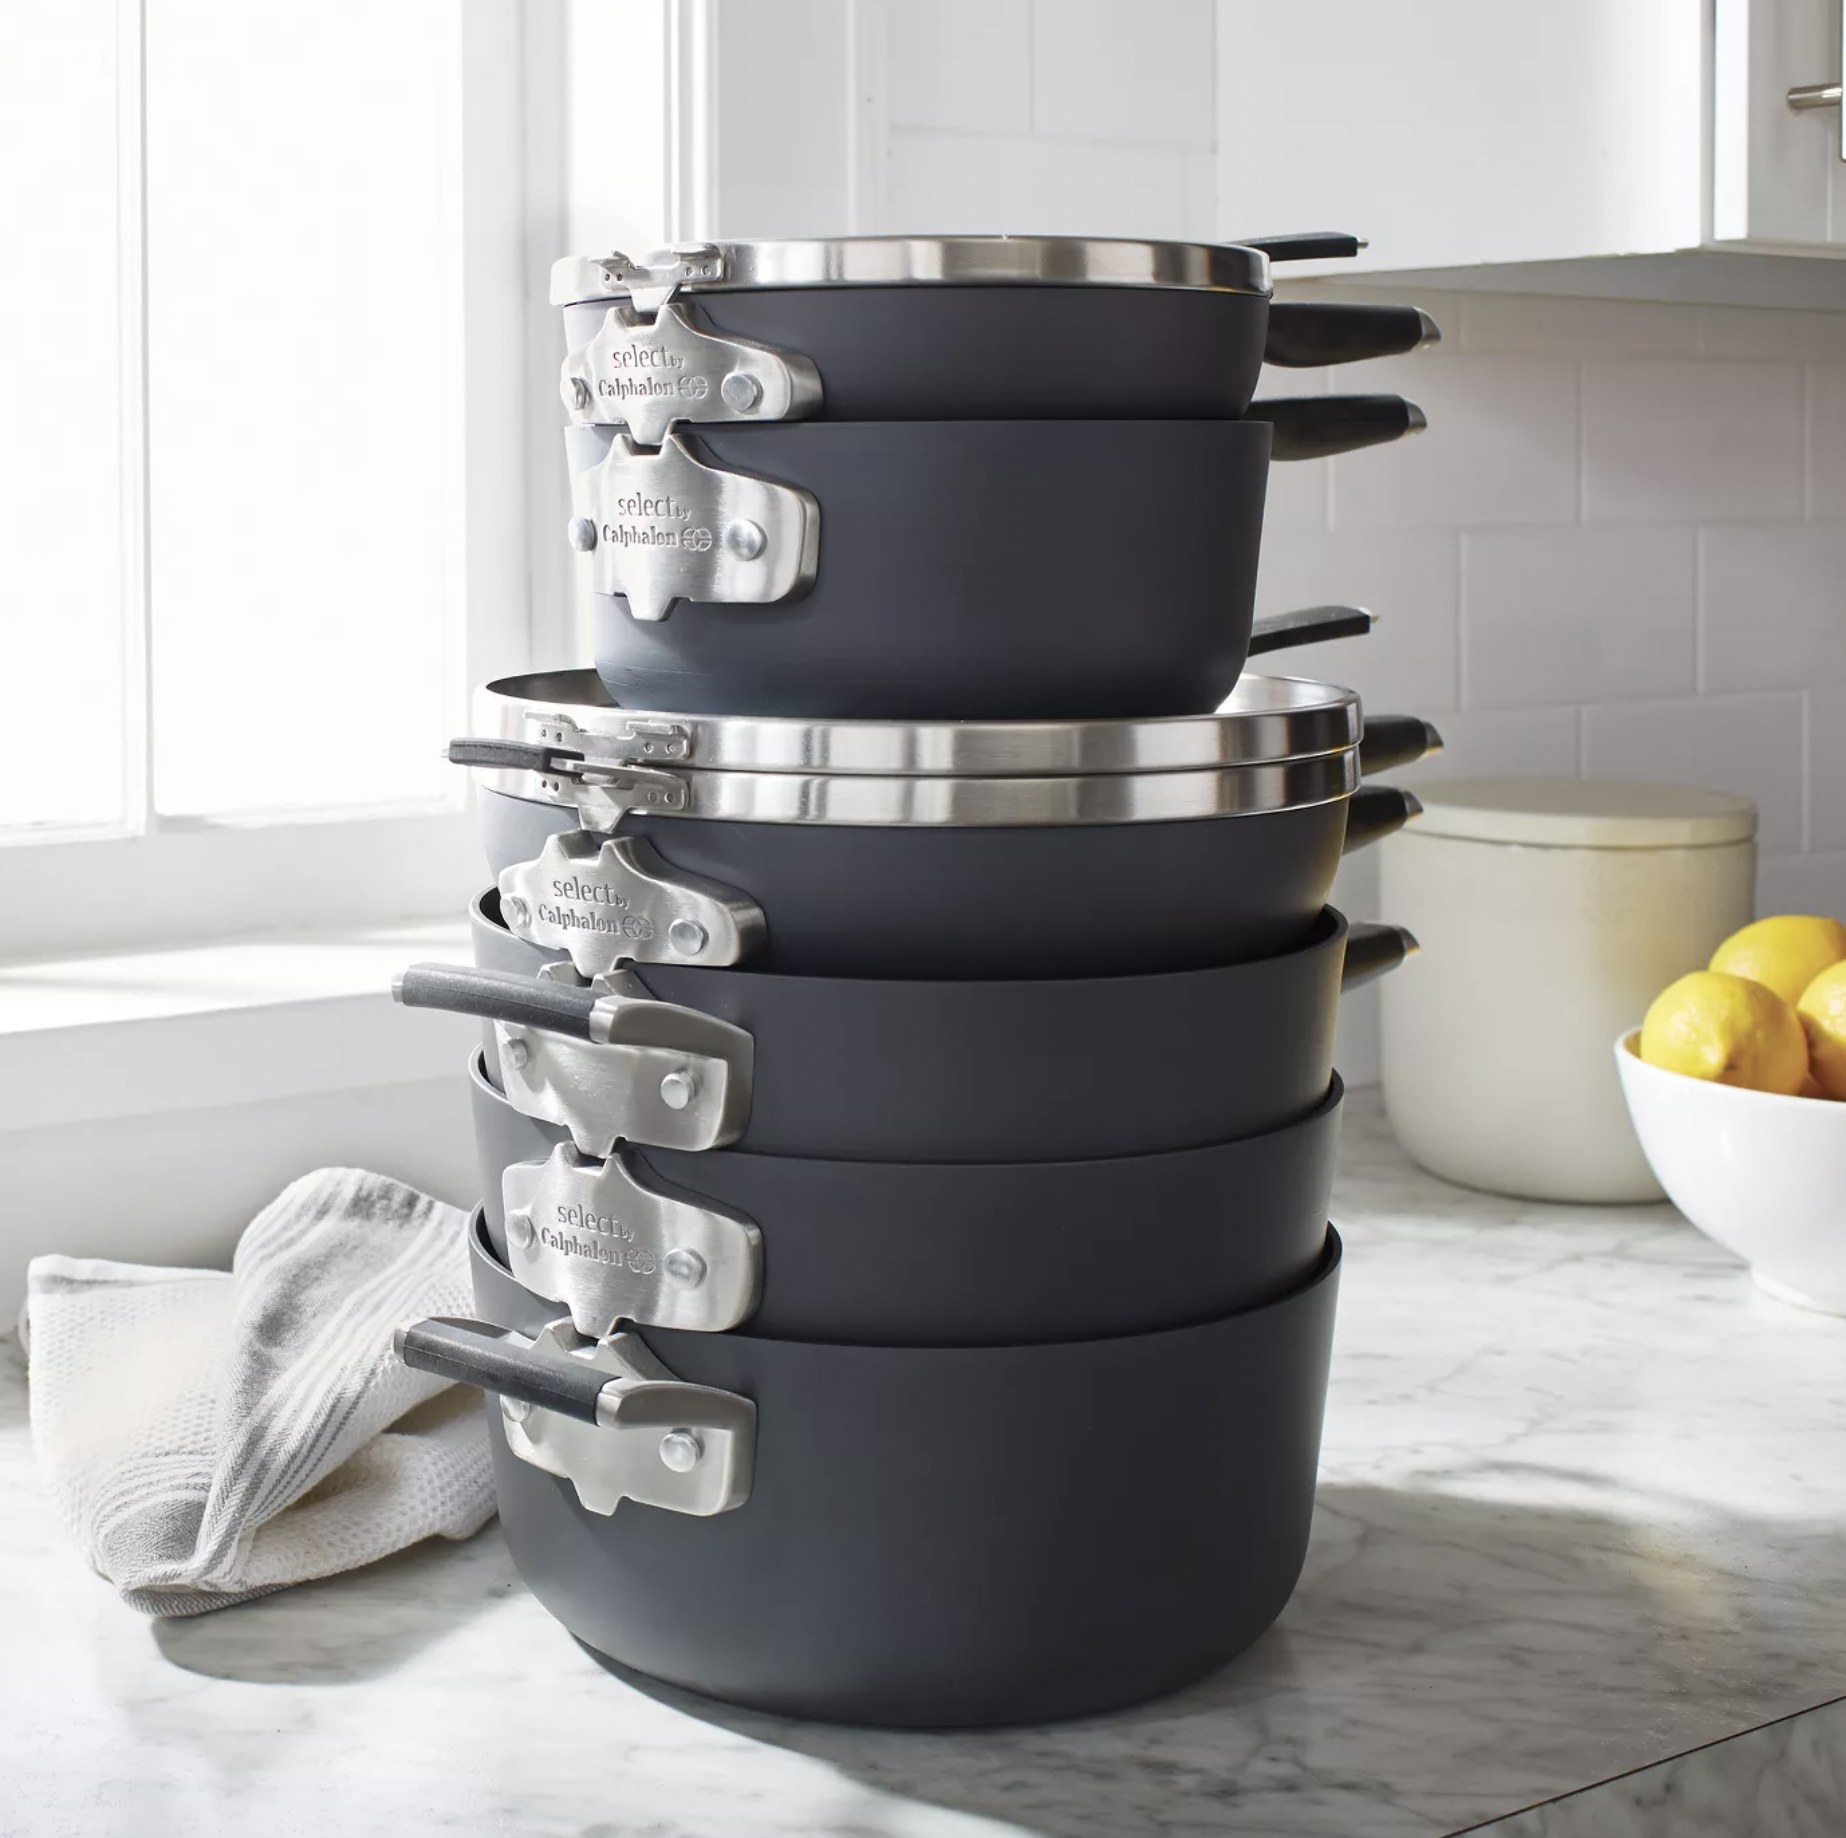 The black matte cookware stacked